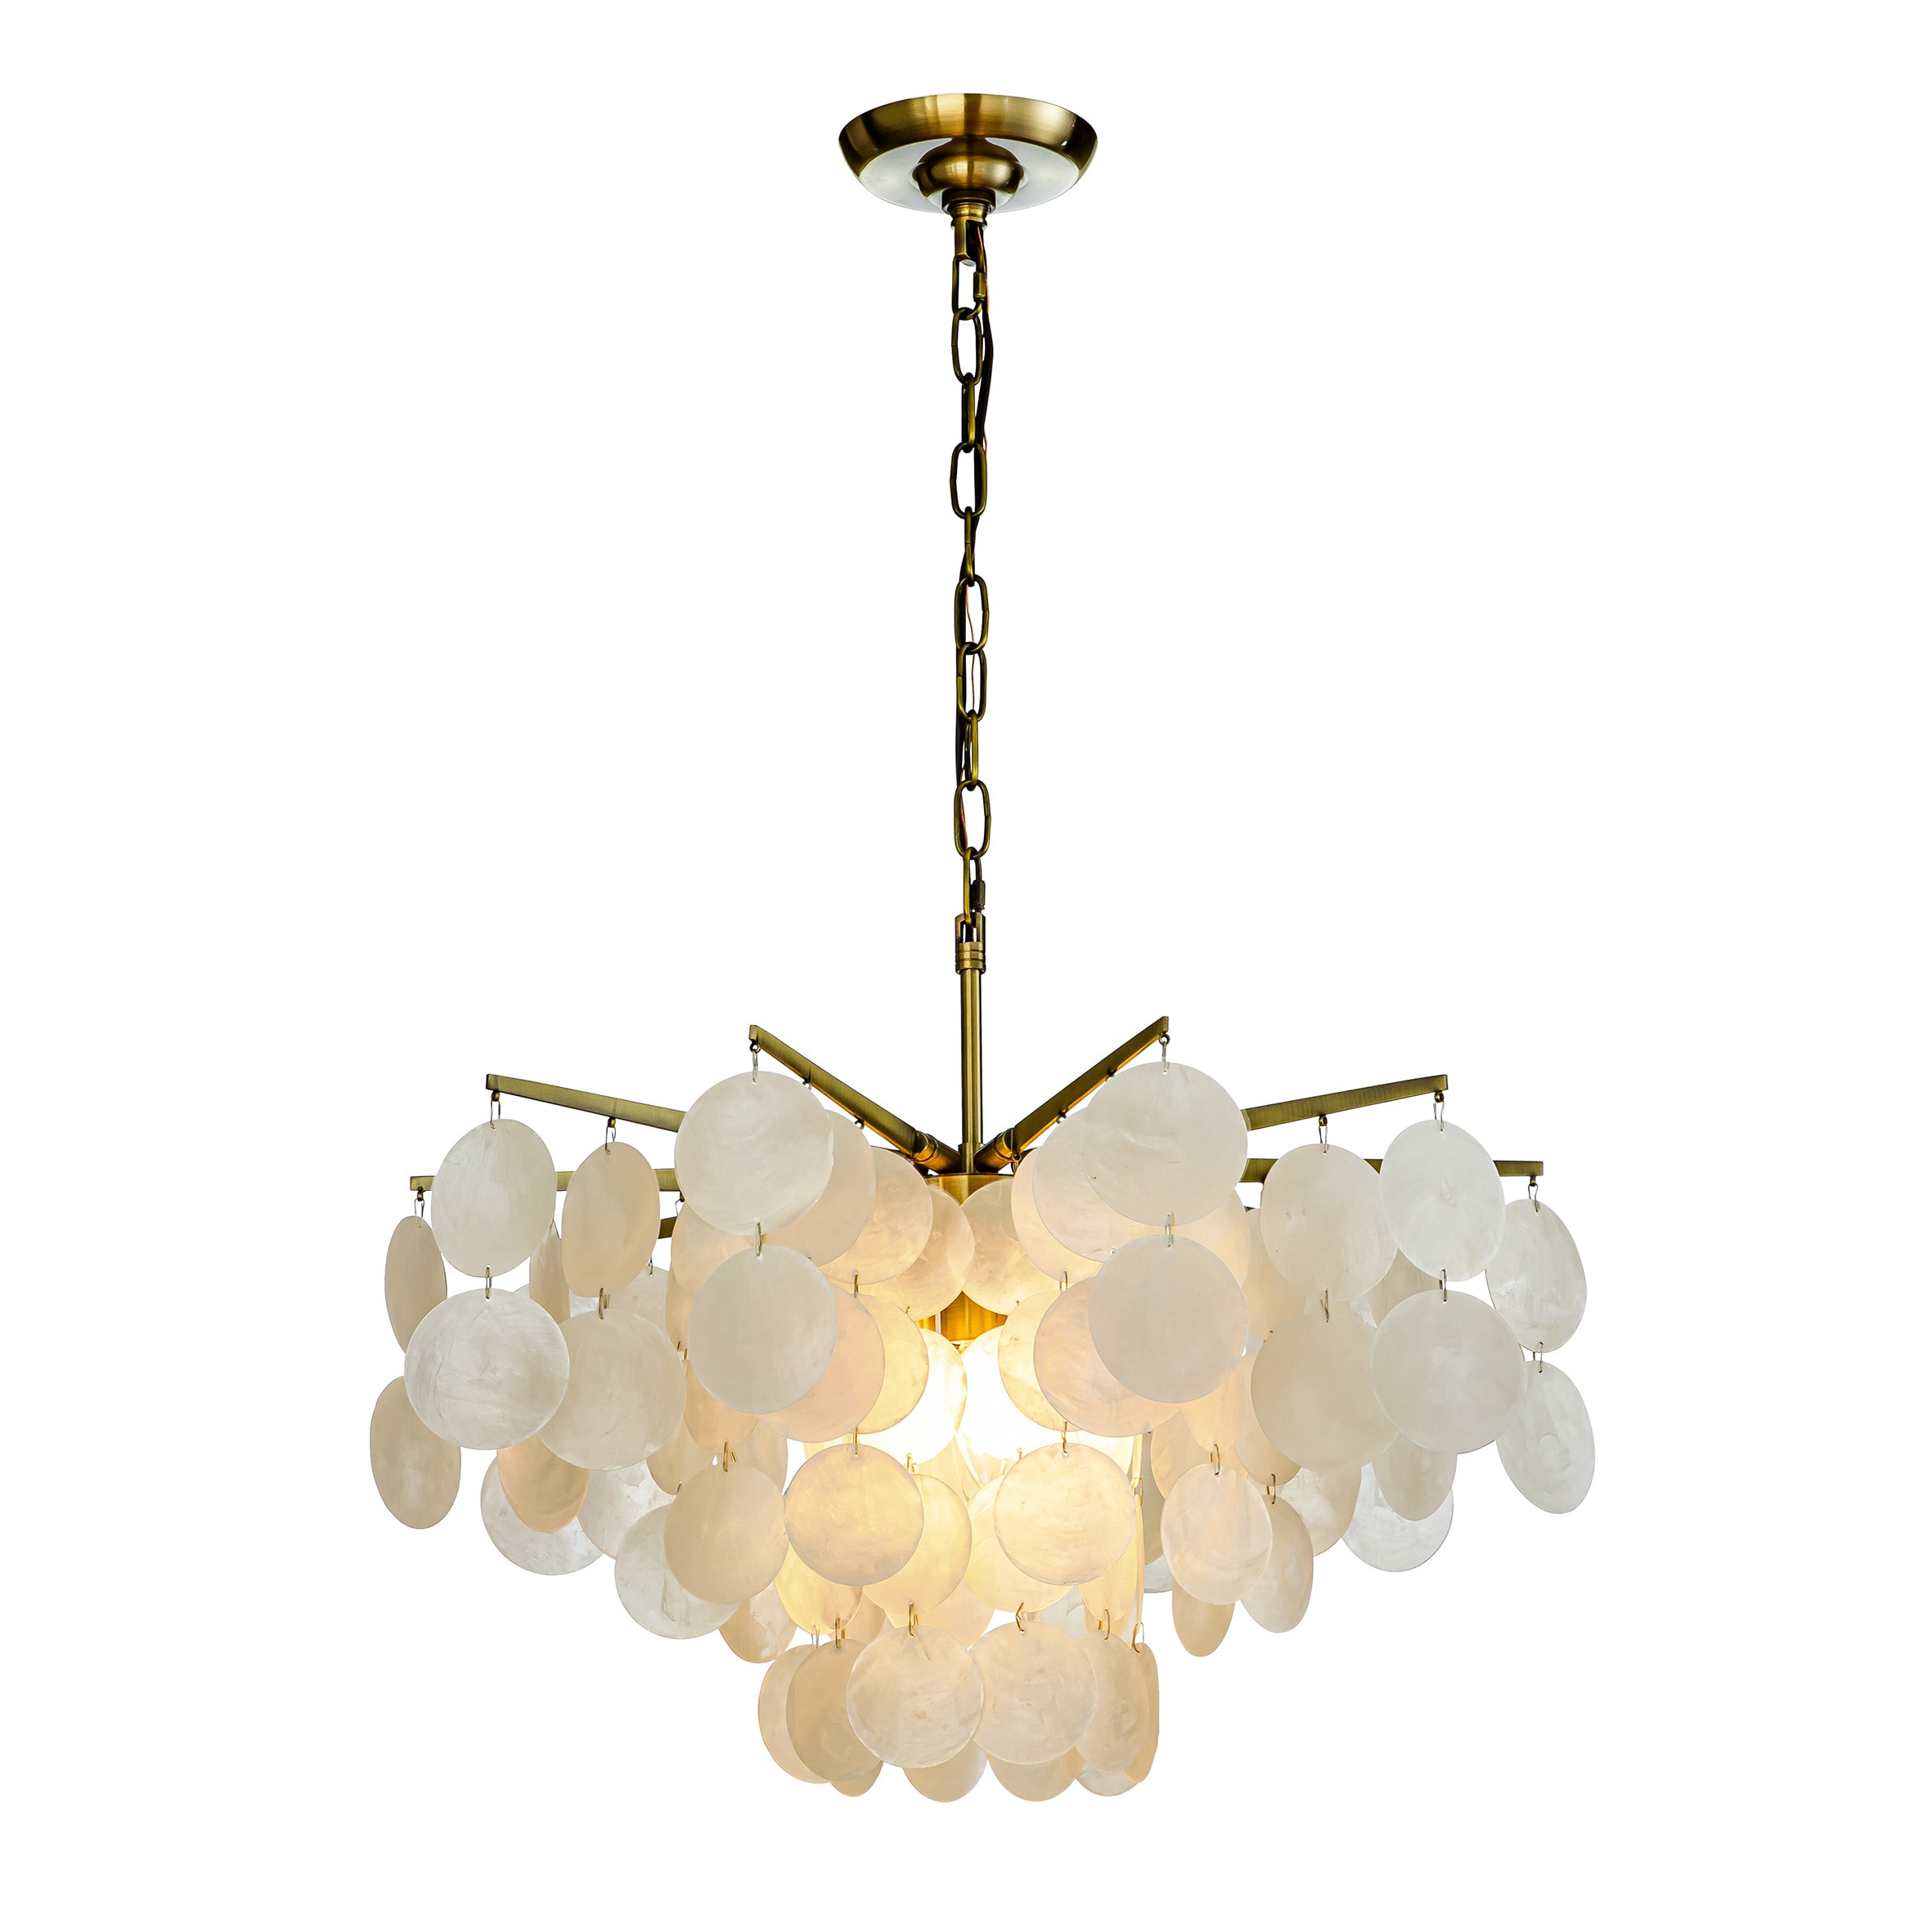 AloaDecor Lighting Gold at department the Damp in 4-Light Chandeliers Coastal Chandelier Rated